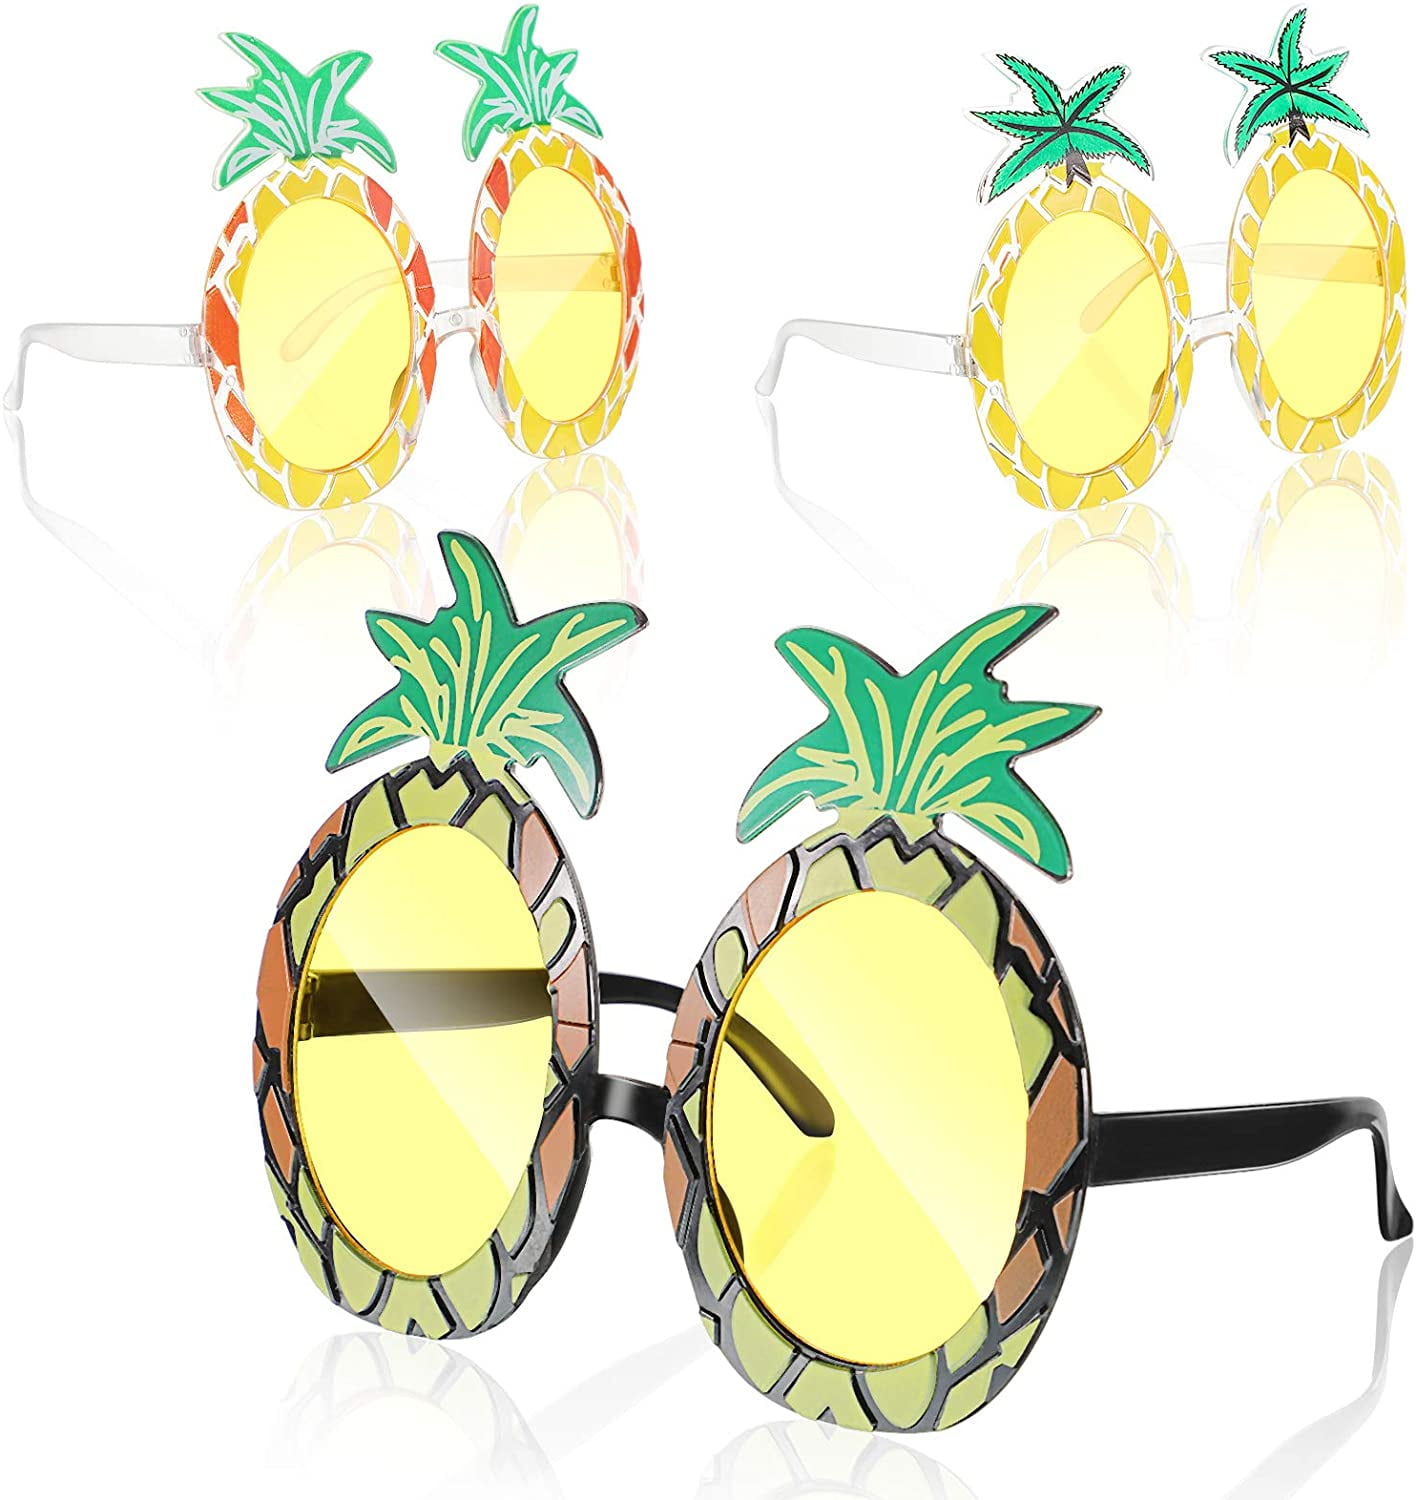 Blulu 2 Pairs Pineapple Glasses Pineapple Shape Party Glasses Hawaiian Tropical Sunglasses for Themed Photo Props Party Accessory 